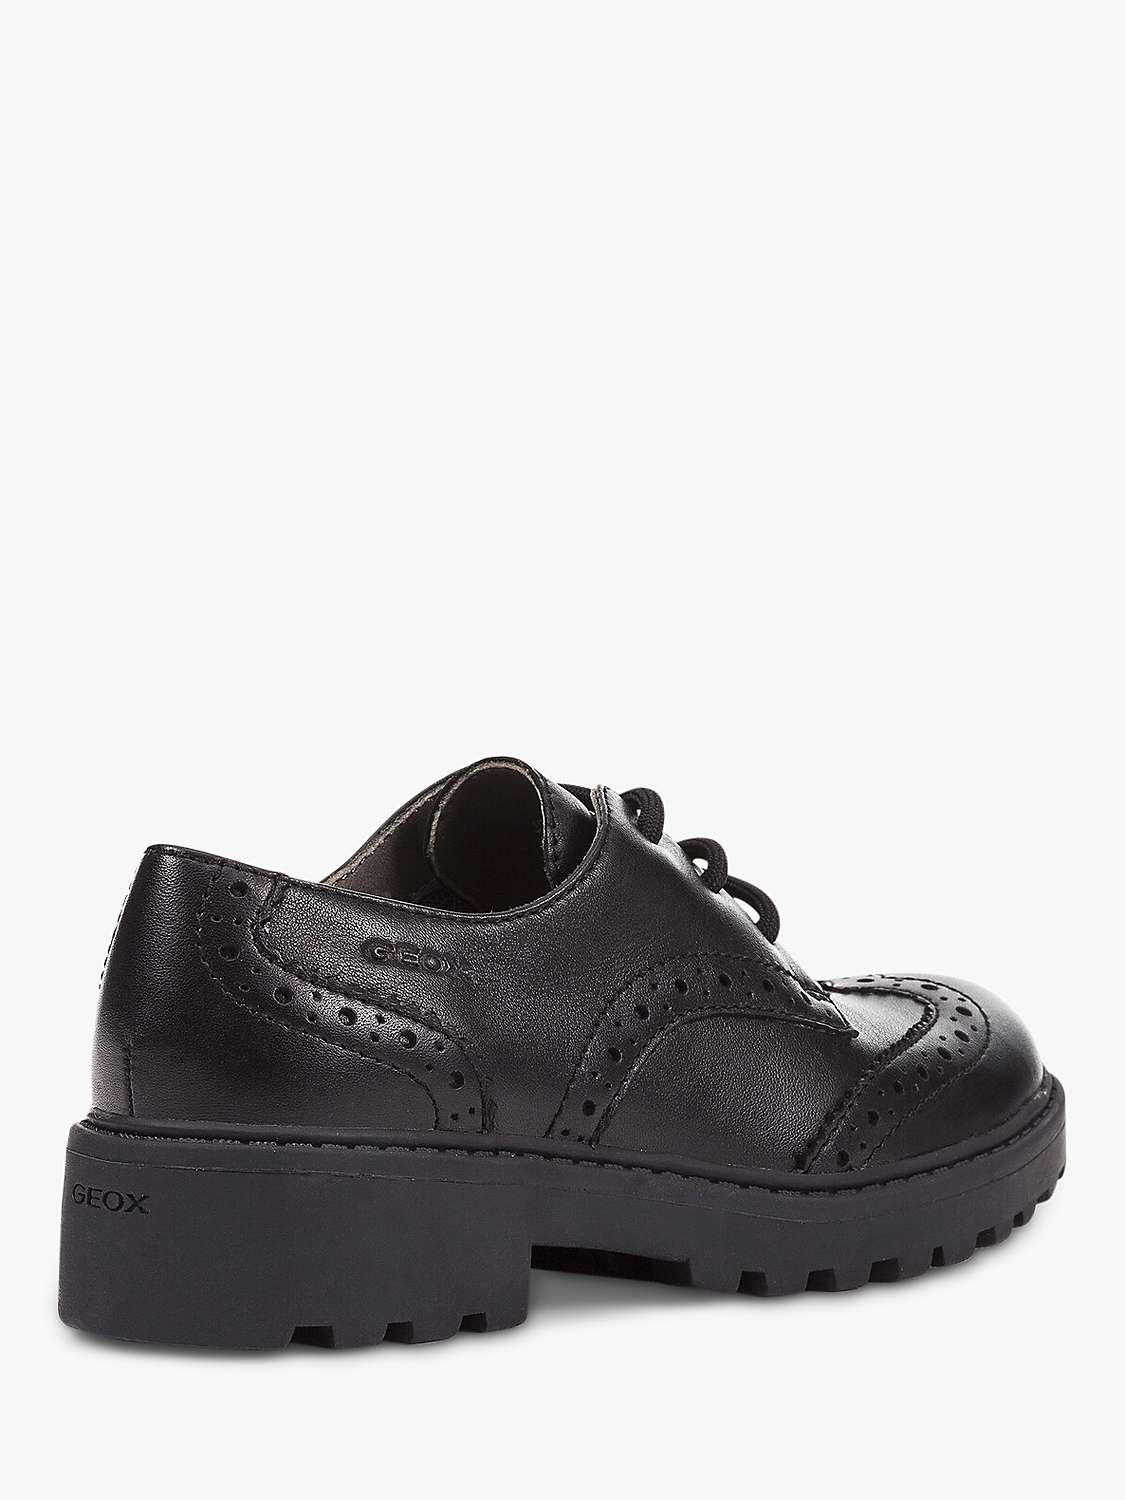 Buy Geox Children's Casey Lace Up Brogue School Shoes Online at johnlewis.com